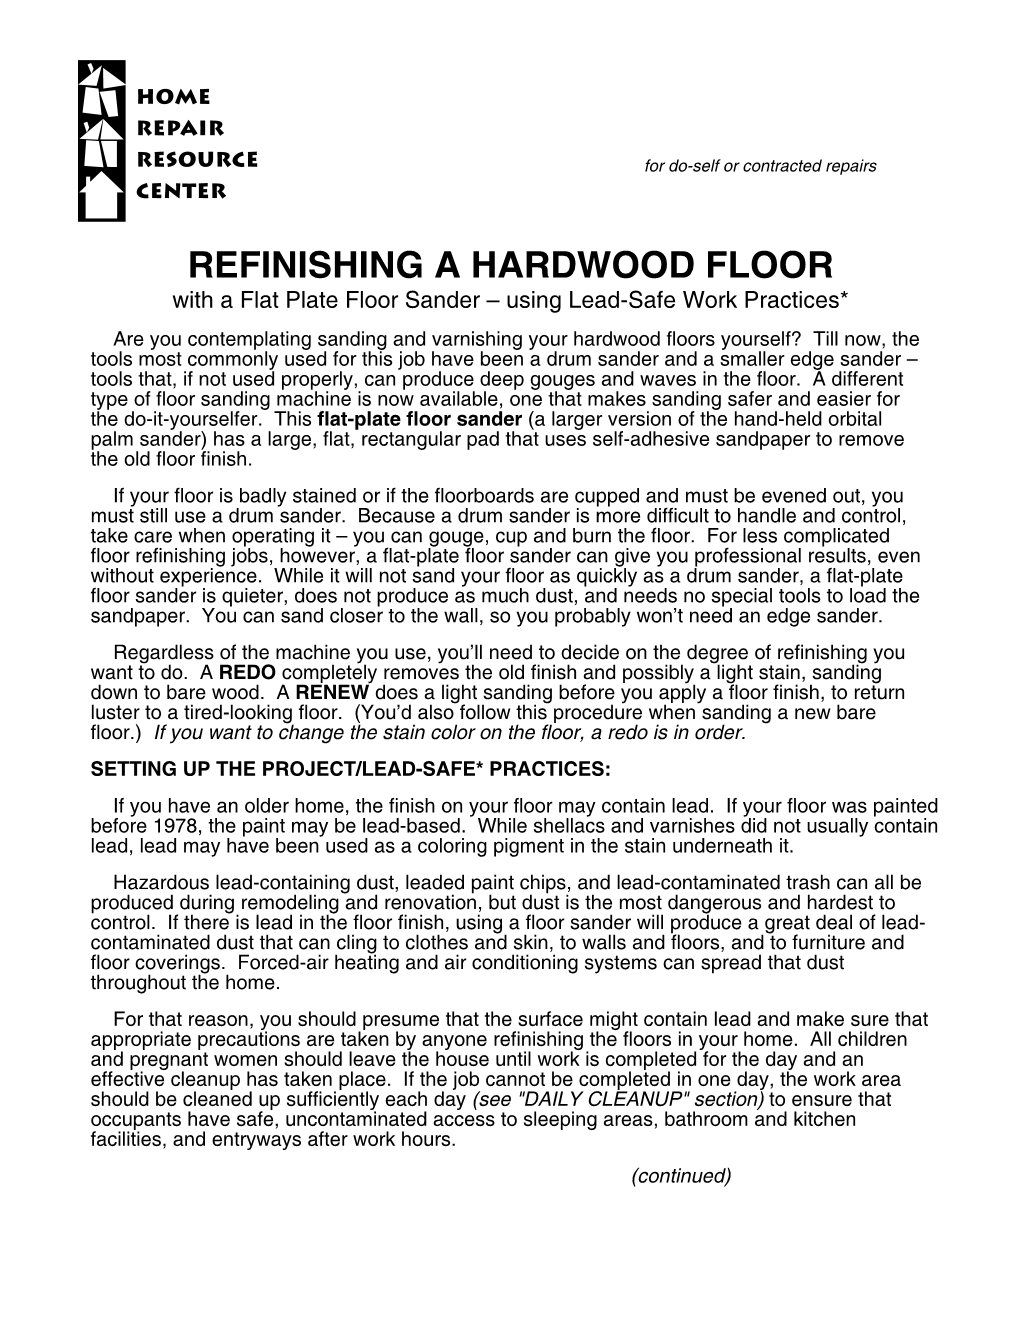 REFINISHING a HARDWOOD FLOOR with a Flat Plate Floor Sander – Using Lead-Safe Work Practices*